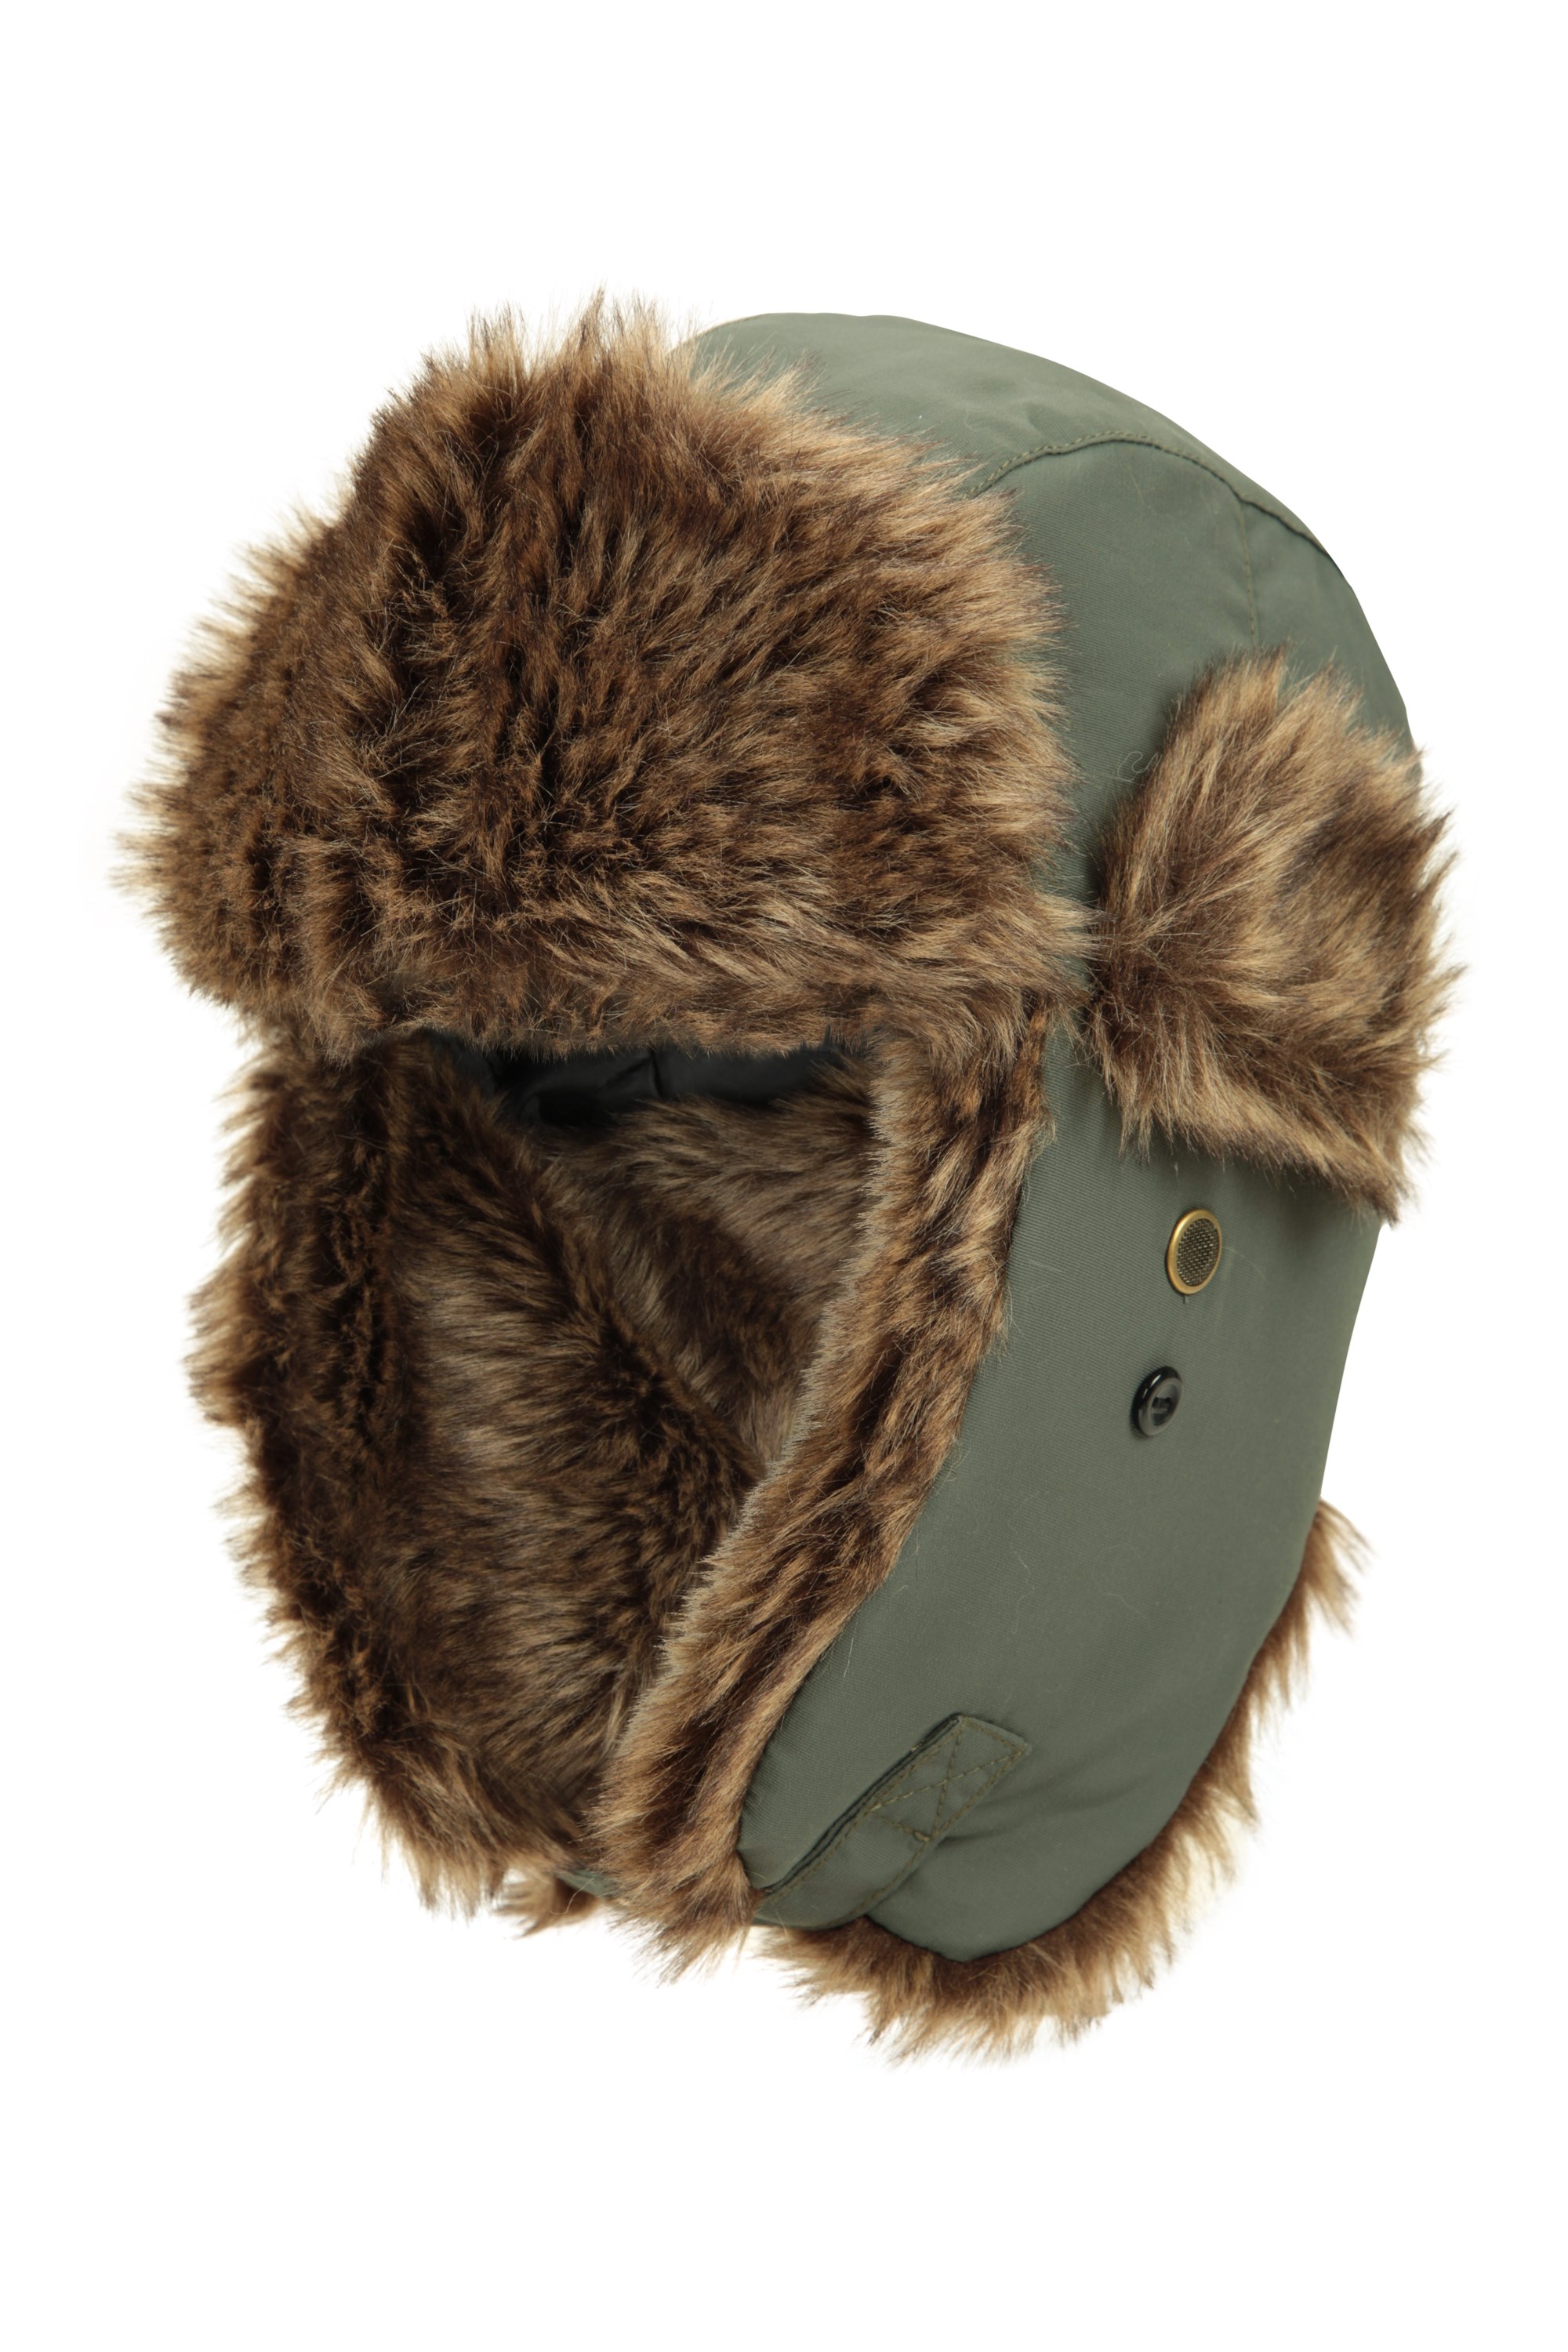 Winter Trapper Hat for Men Women Russian Faux Fur Ushanka Aviator Bomber  Hat Mens Trapper Hat with Ear Flaps Climbing Hiking Brown-3 Large-X-Large